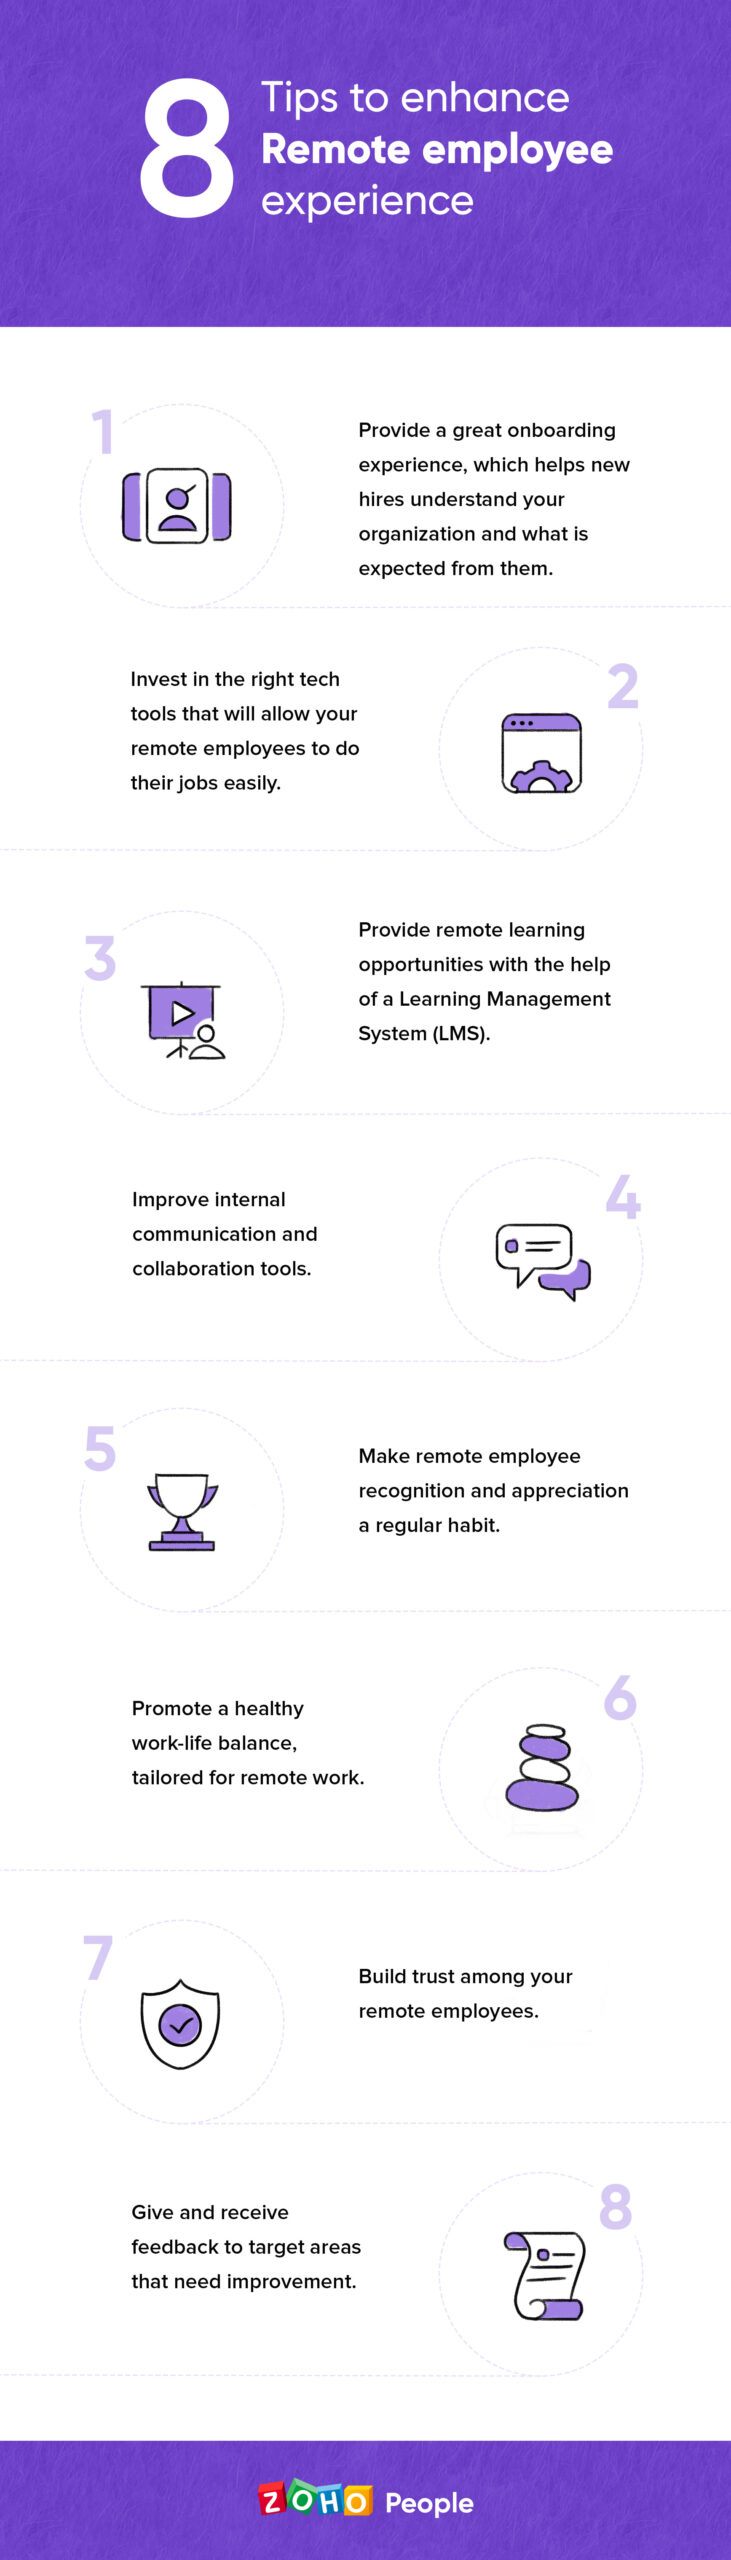 "Improving remote employee experience"